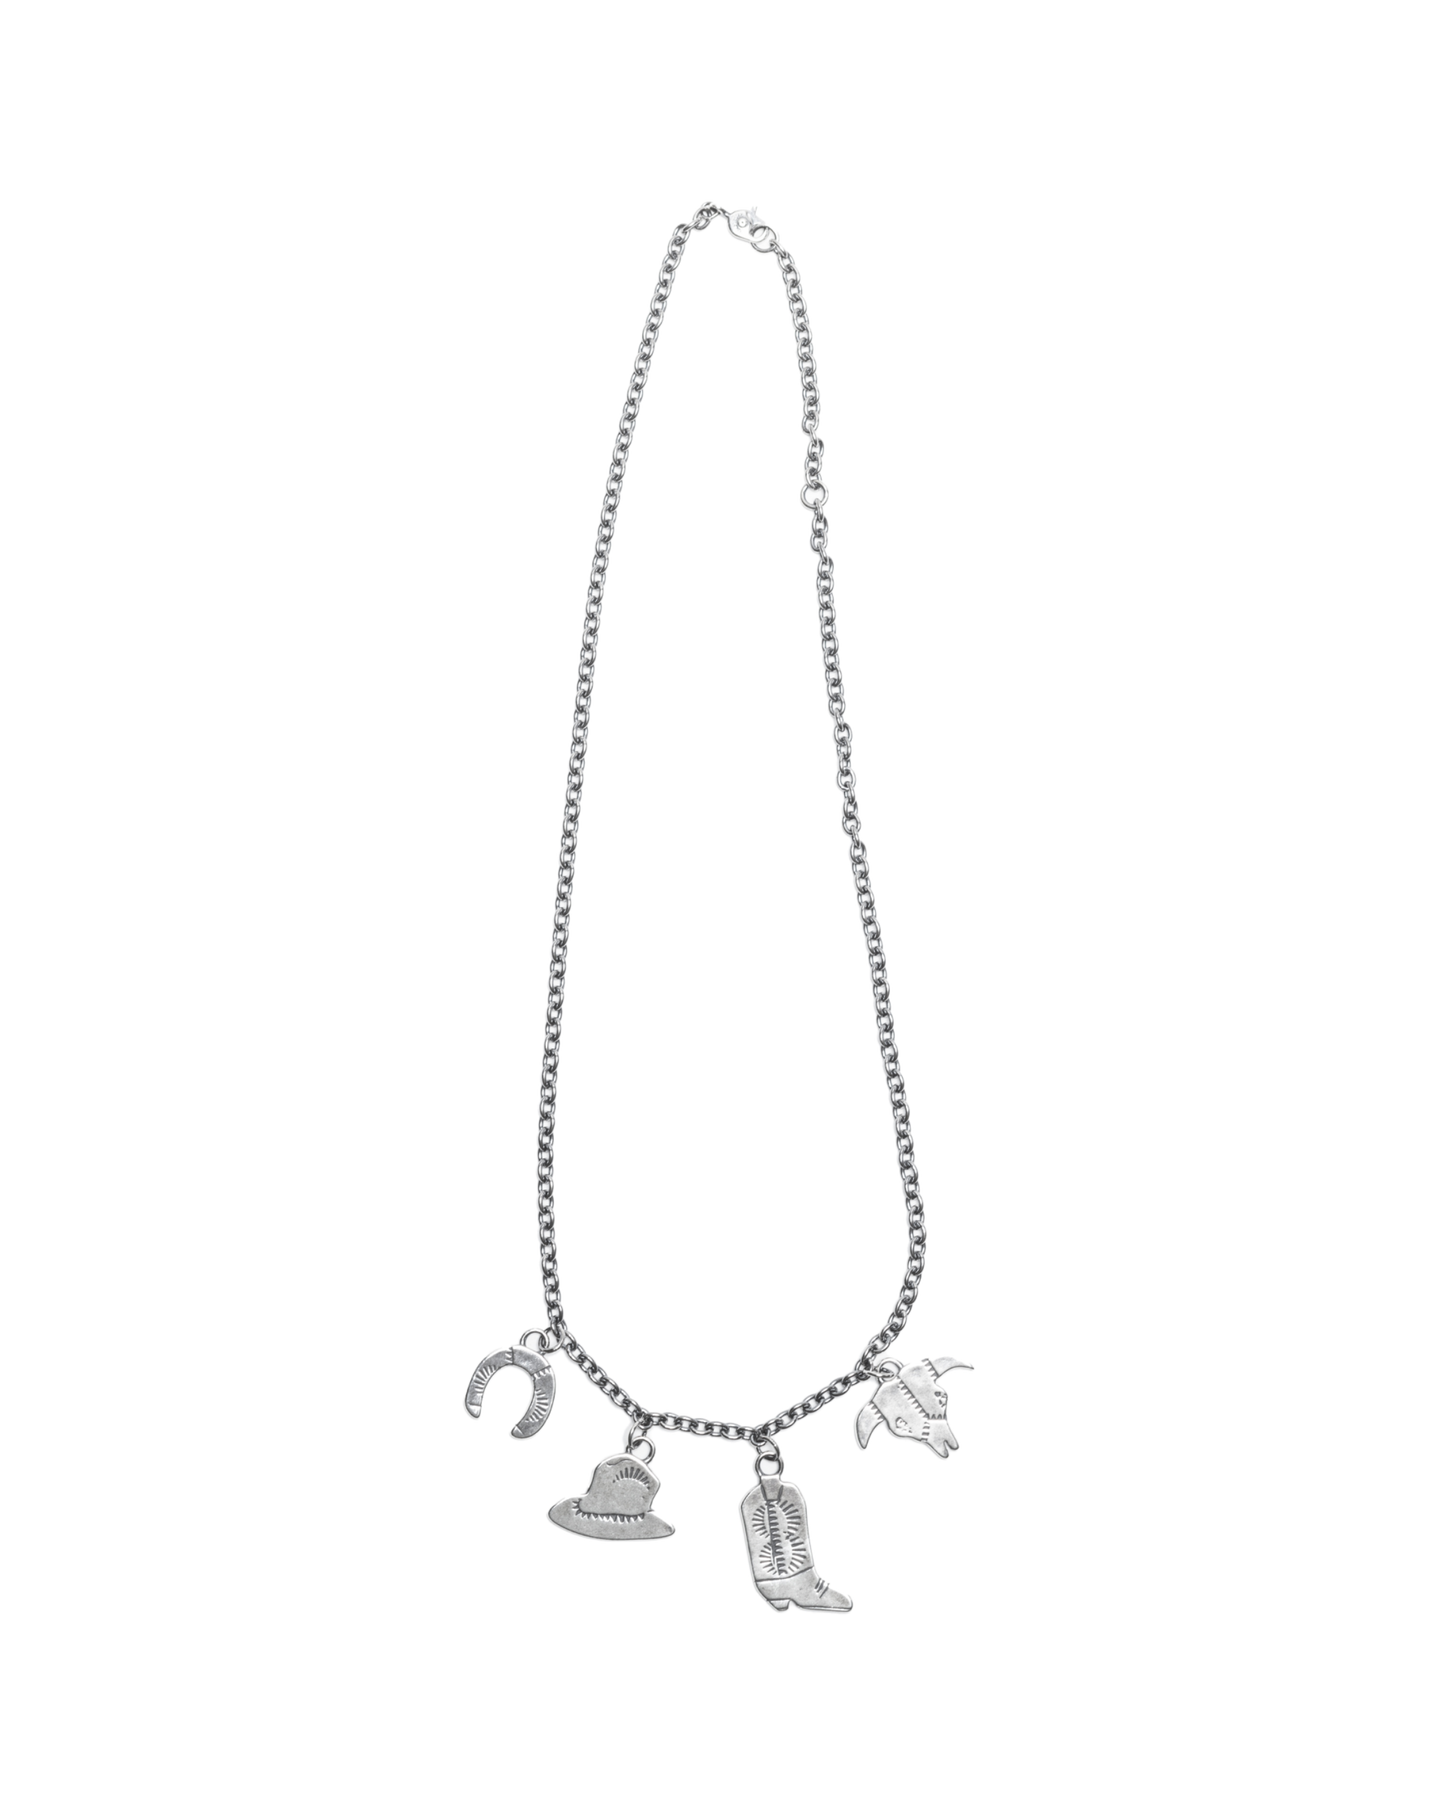 4 PEACE CHAIN NECKLACE